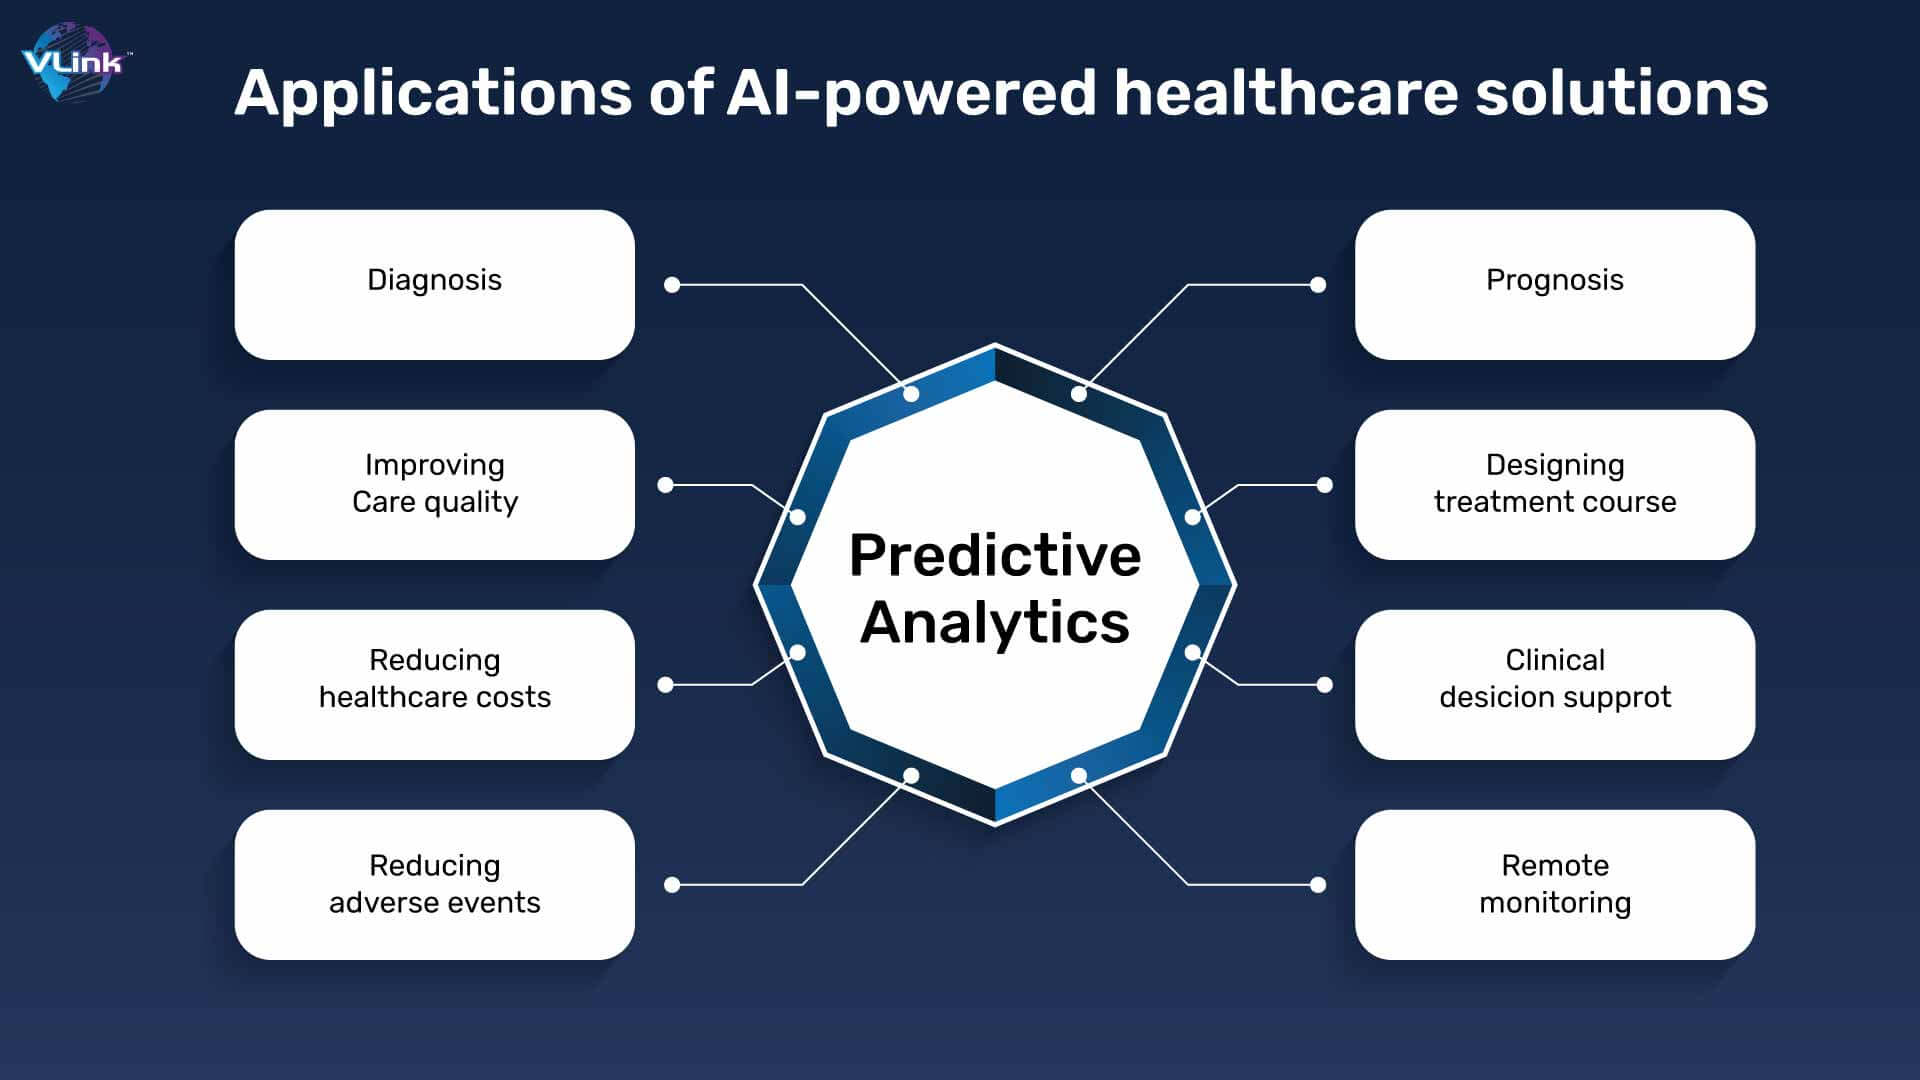 Applications of AI-powered healthcare solutions